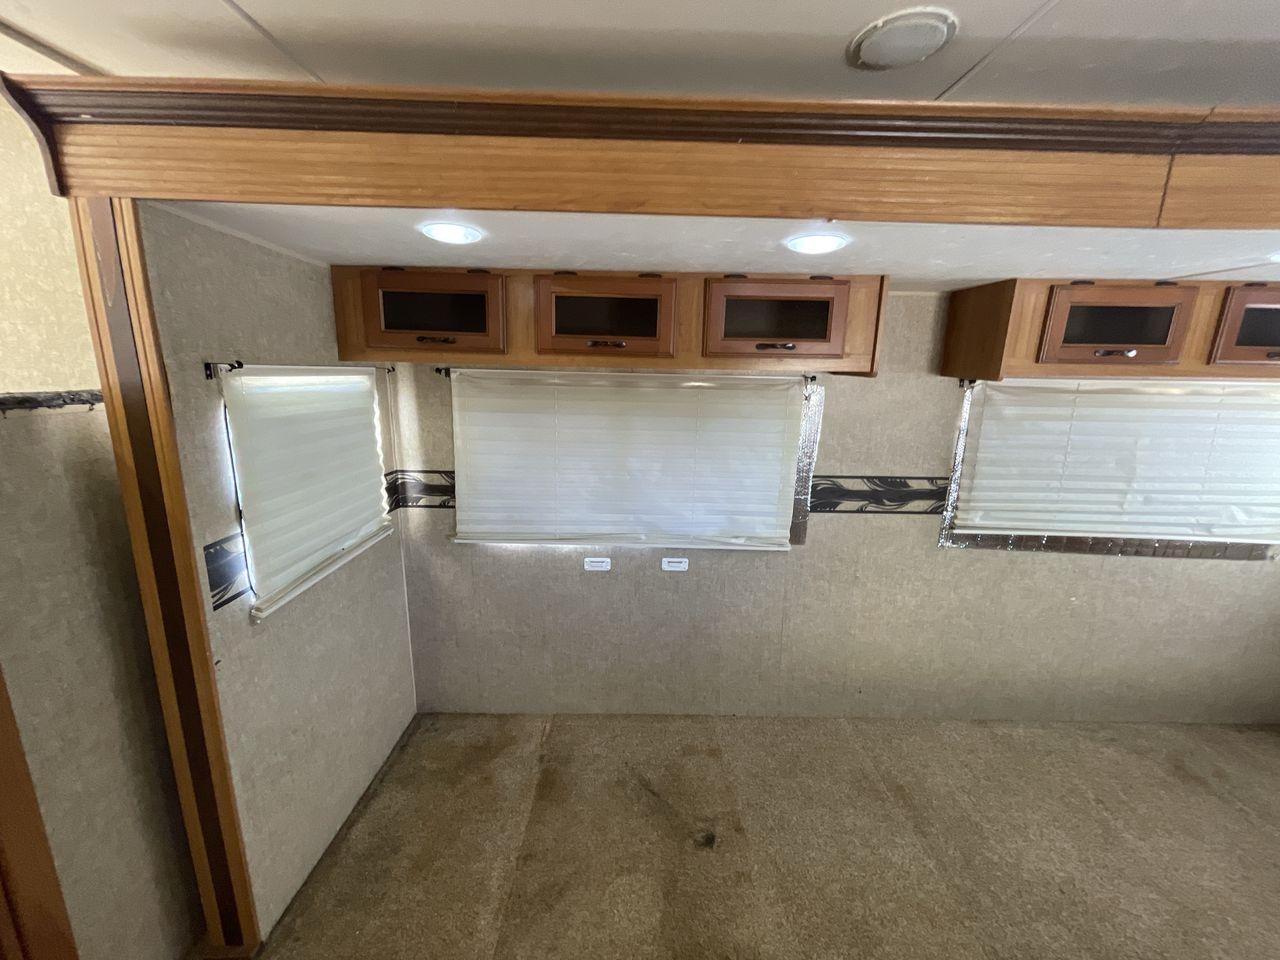 2014 BEIGE KZRV SPREE 282BHS (4EZTL2826E8) , Length: 31.33 ft. | Dry Weight: 5,610 lbs. | Gross Weight: 6,800 lbs. | Slides: 1 transmission, located at 4319 N Main Street, Cleburne, TX, 76033, (817) 221-0660, 32.435829, -97.384178 - Take the 2014 KZ RV Spree 282BHS Travel Trailer on your next vacation. Comfort, style, and functionality are all combined in this well-designed travel trailer, which makes it a great option for families or groups looking for a dependable and roomy mobile home. This trailer measures 31.33 ft in le - Photo #14